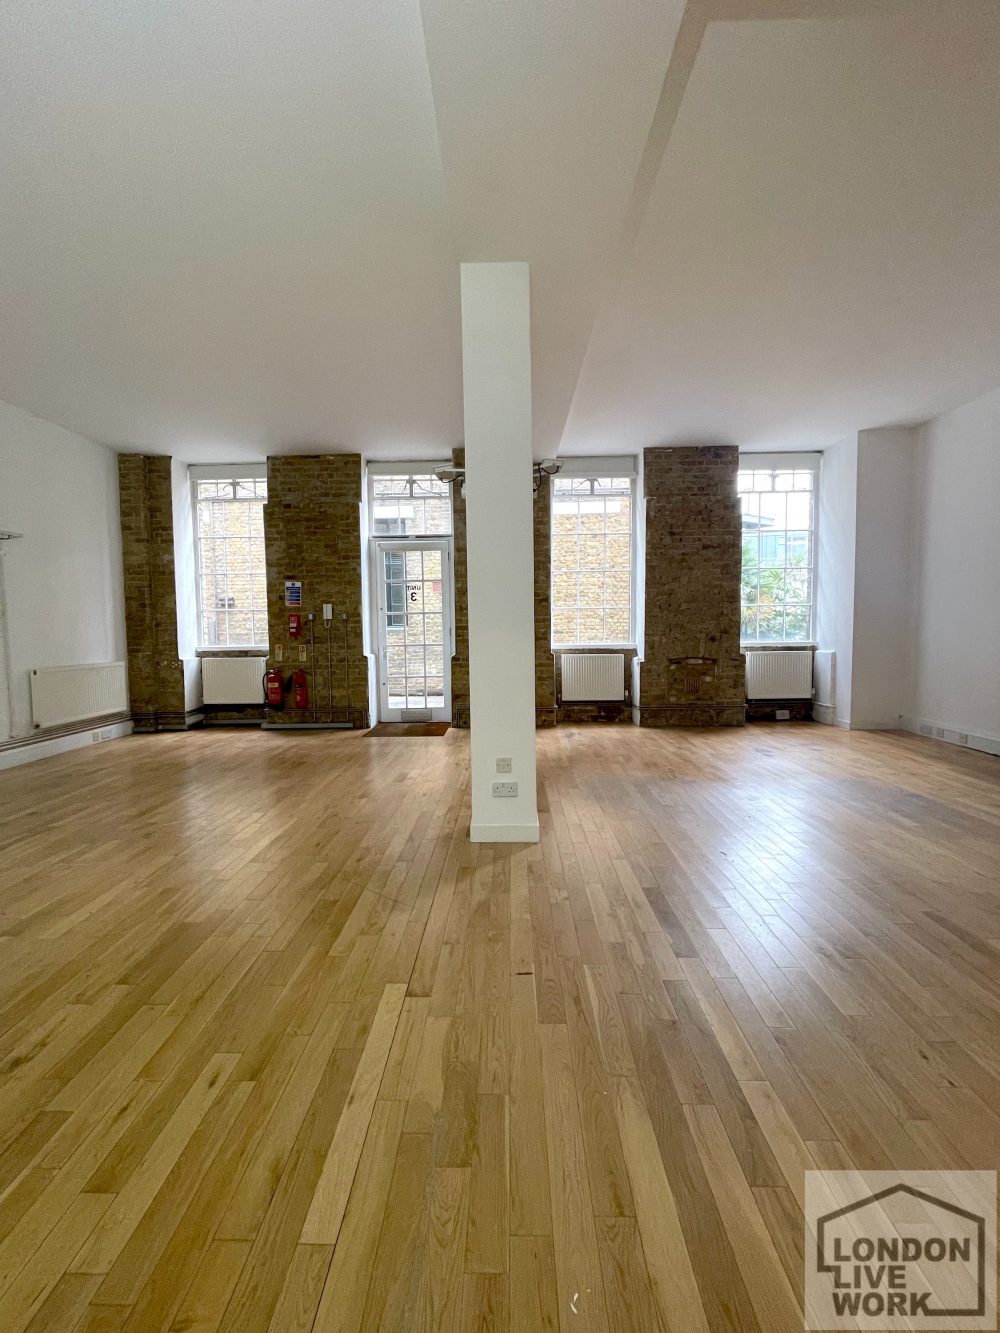 N16 Creative studio to rent in converted piano factory in Stoke Newington 9